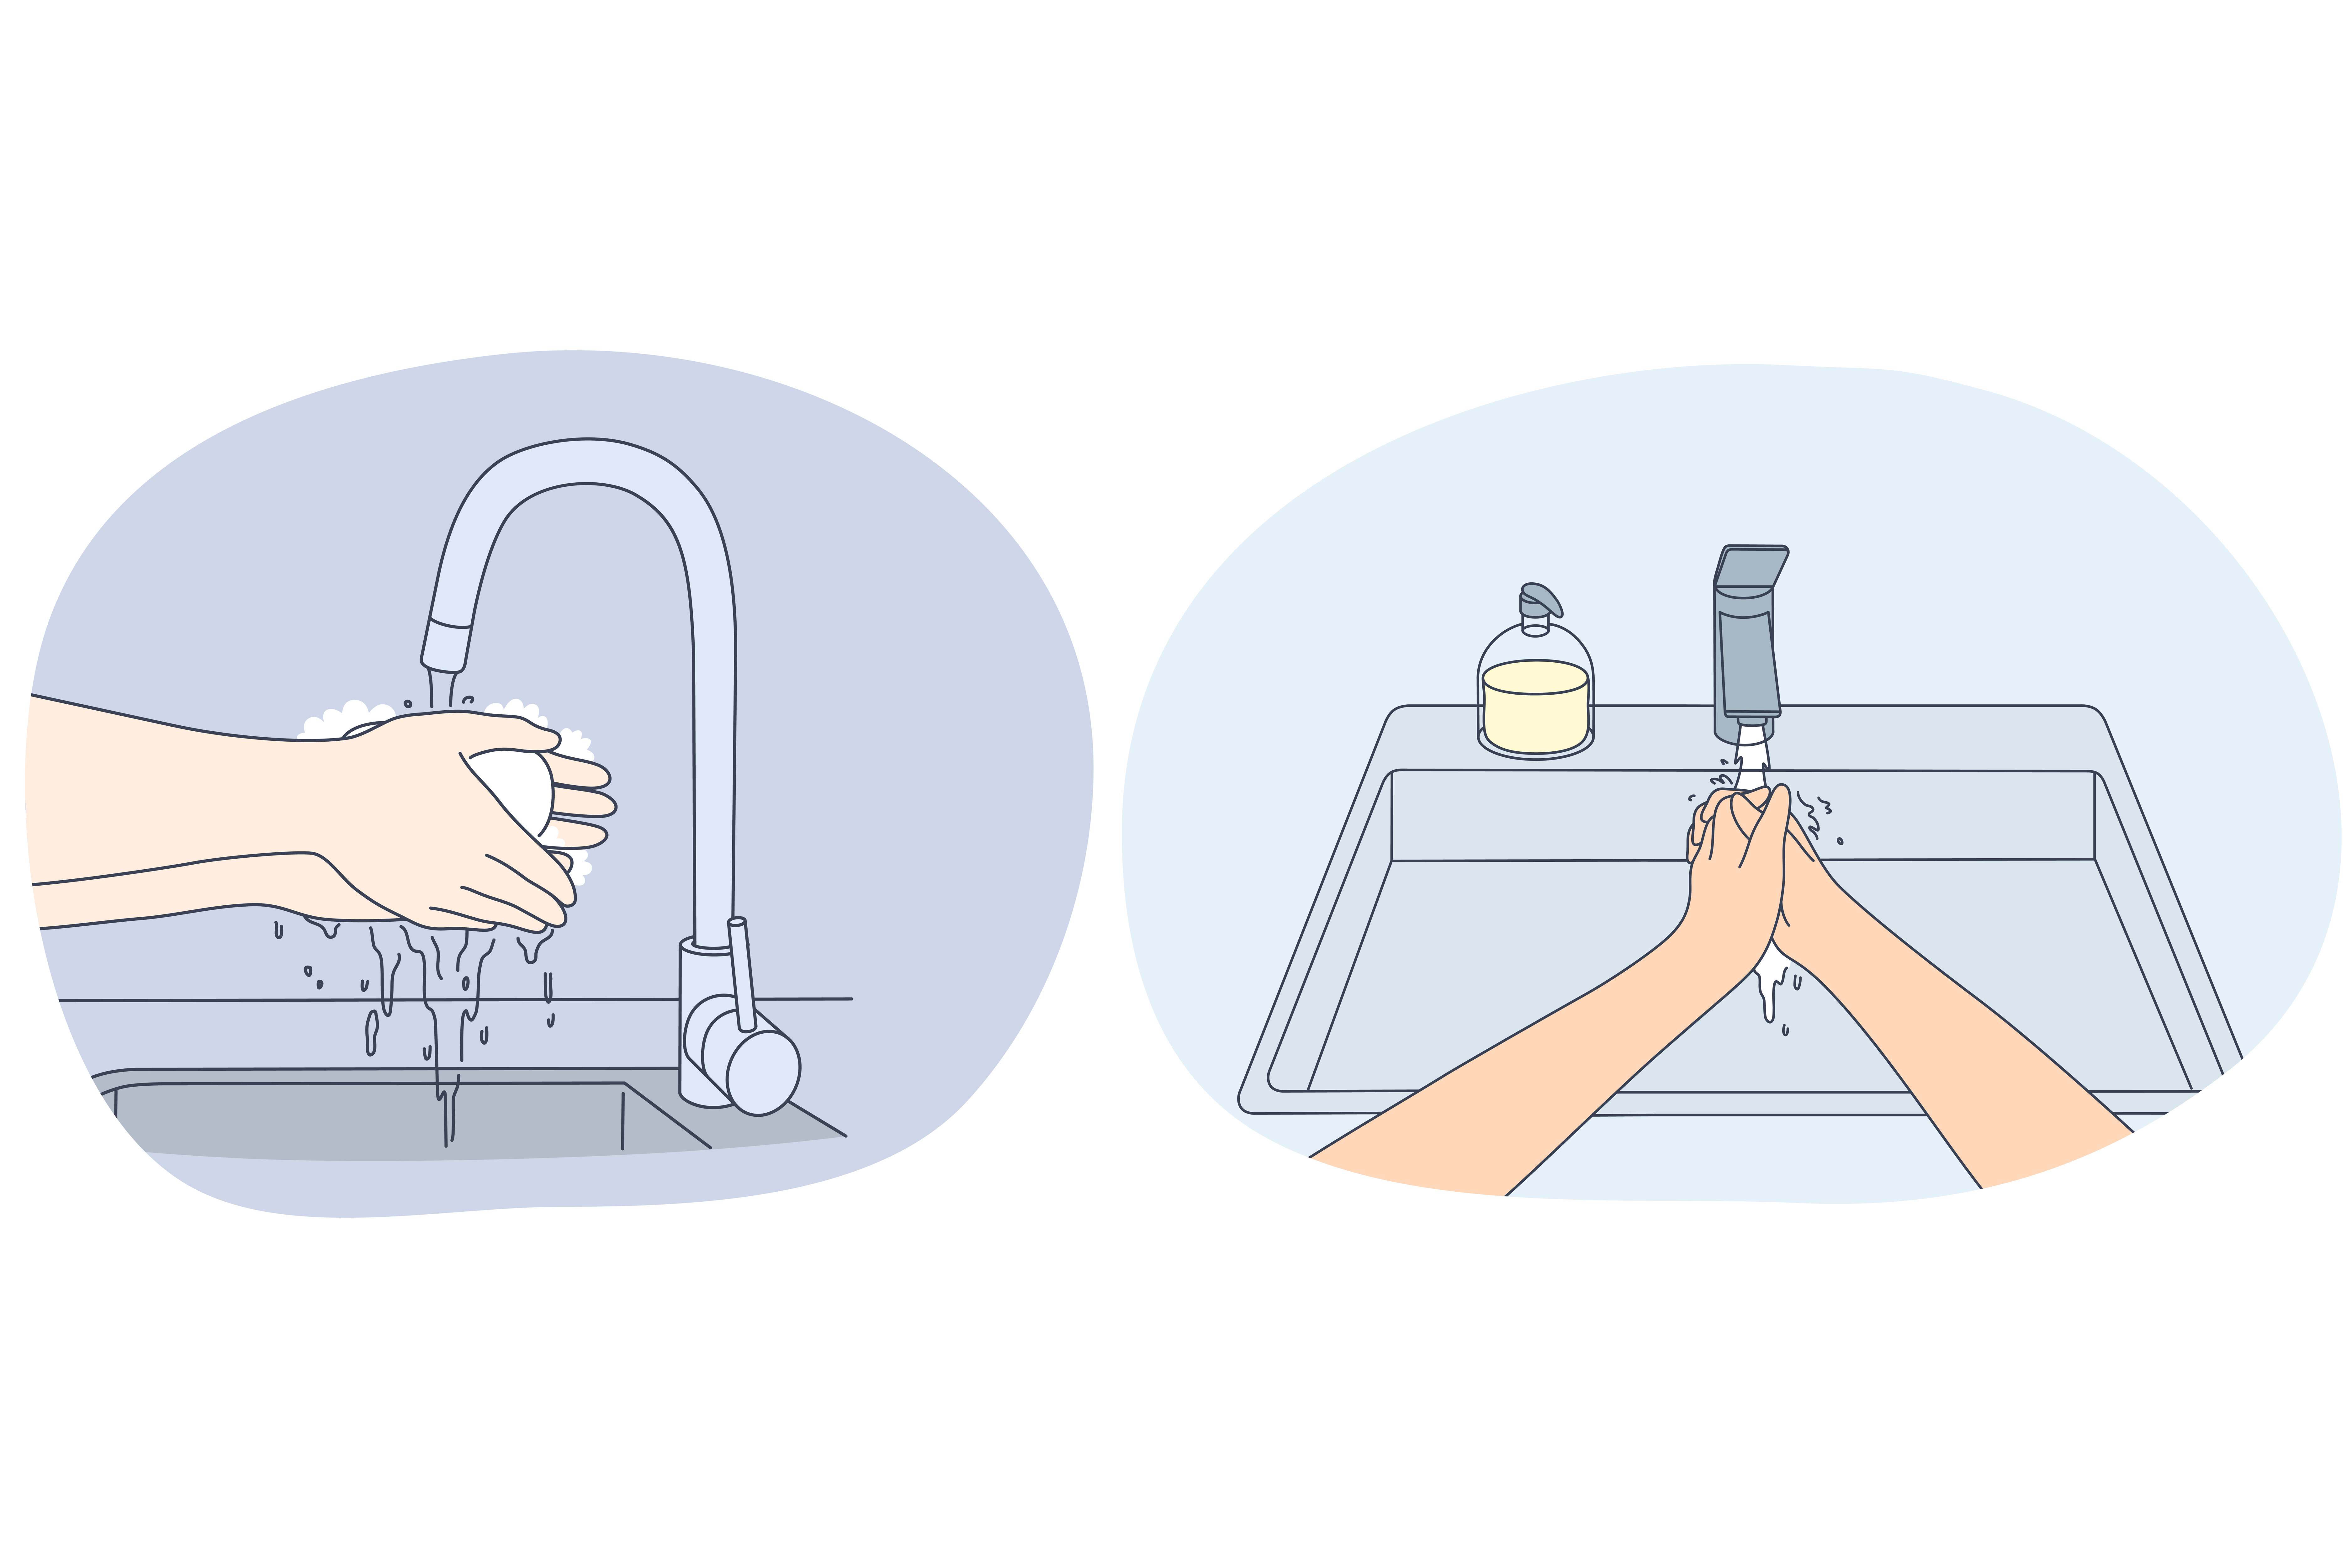 Washing hands, personal hygiene and protection from virus concept. People washing hands properly with soap for protective care in home or public places sinks vector illustration . Washing hands, personal hygiene and protection from virus concept